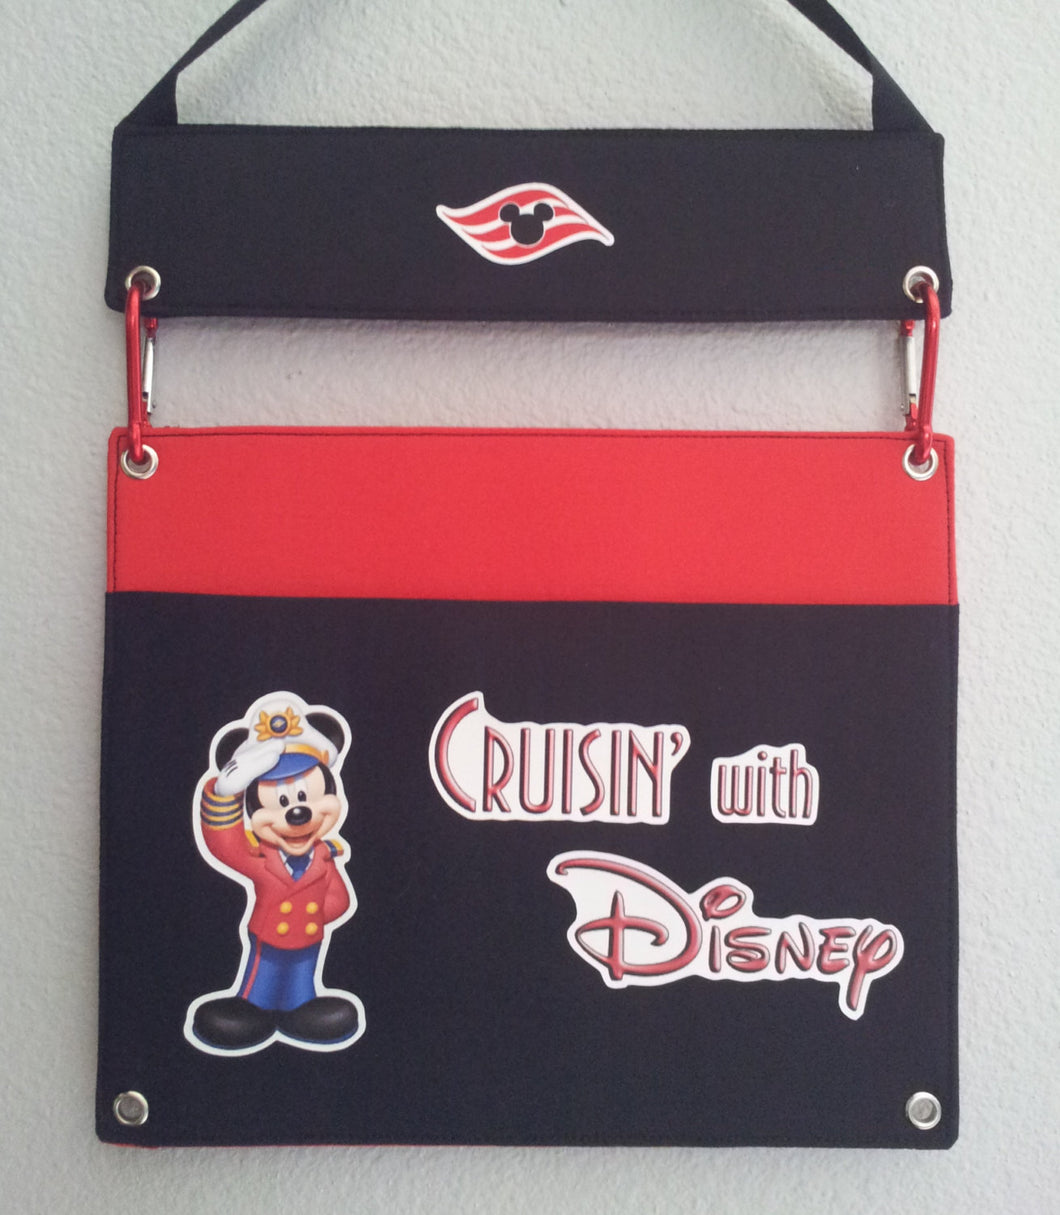 Fish Extender - DCL - Disney Cruise - One Pocket Flexible Fish Extender - FE - Fish Exchange - Mickey - Cruise Gift Exchange